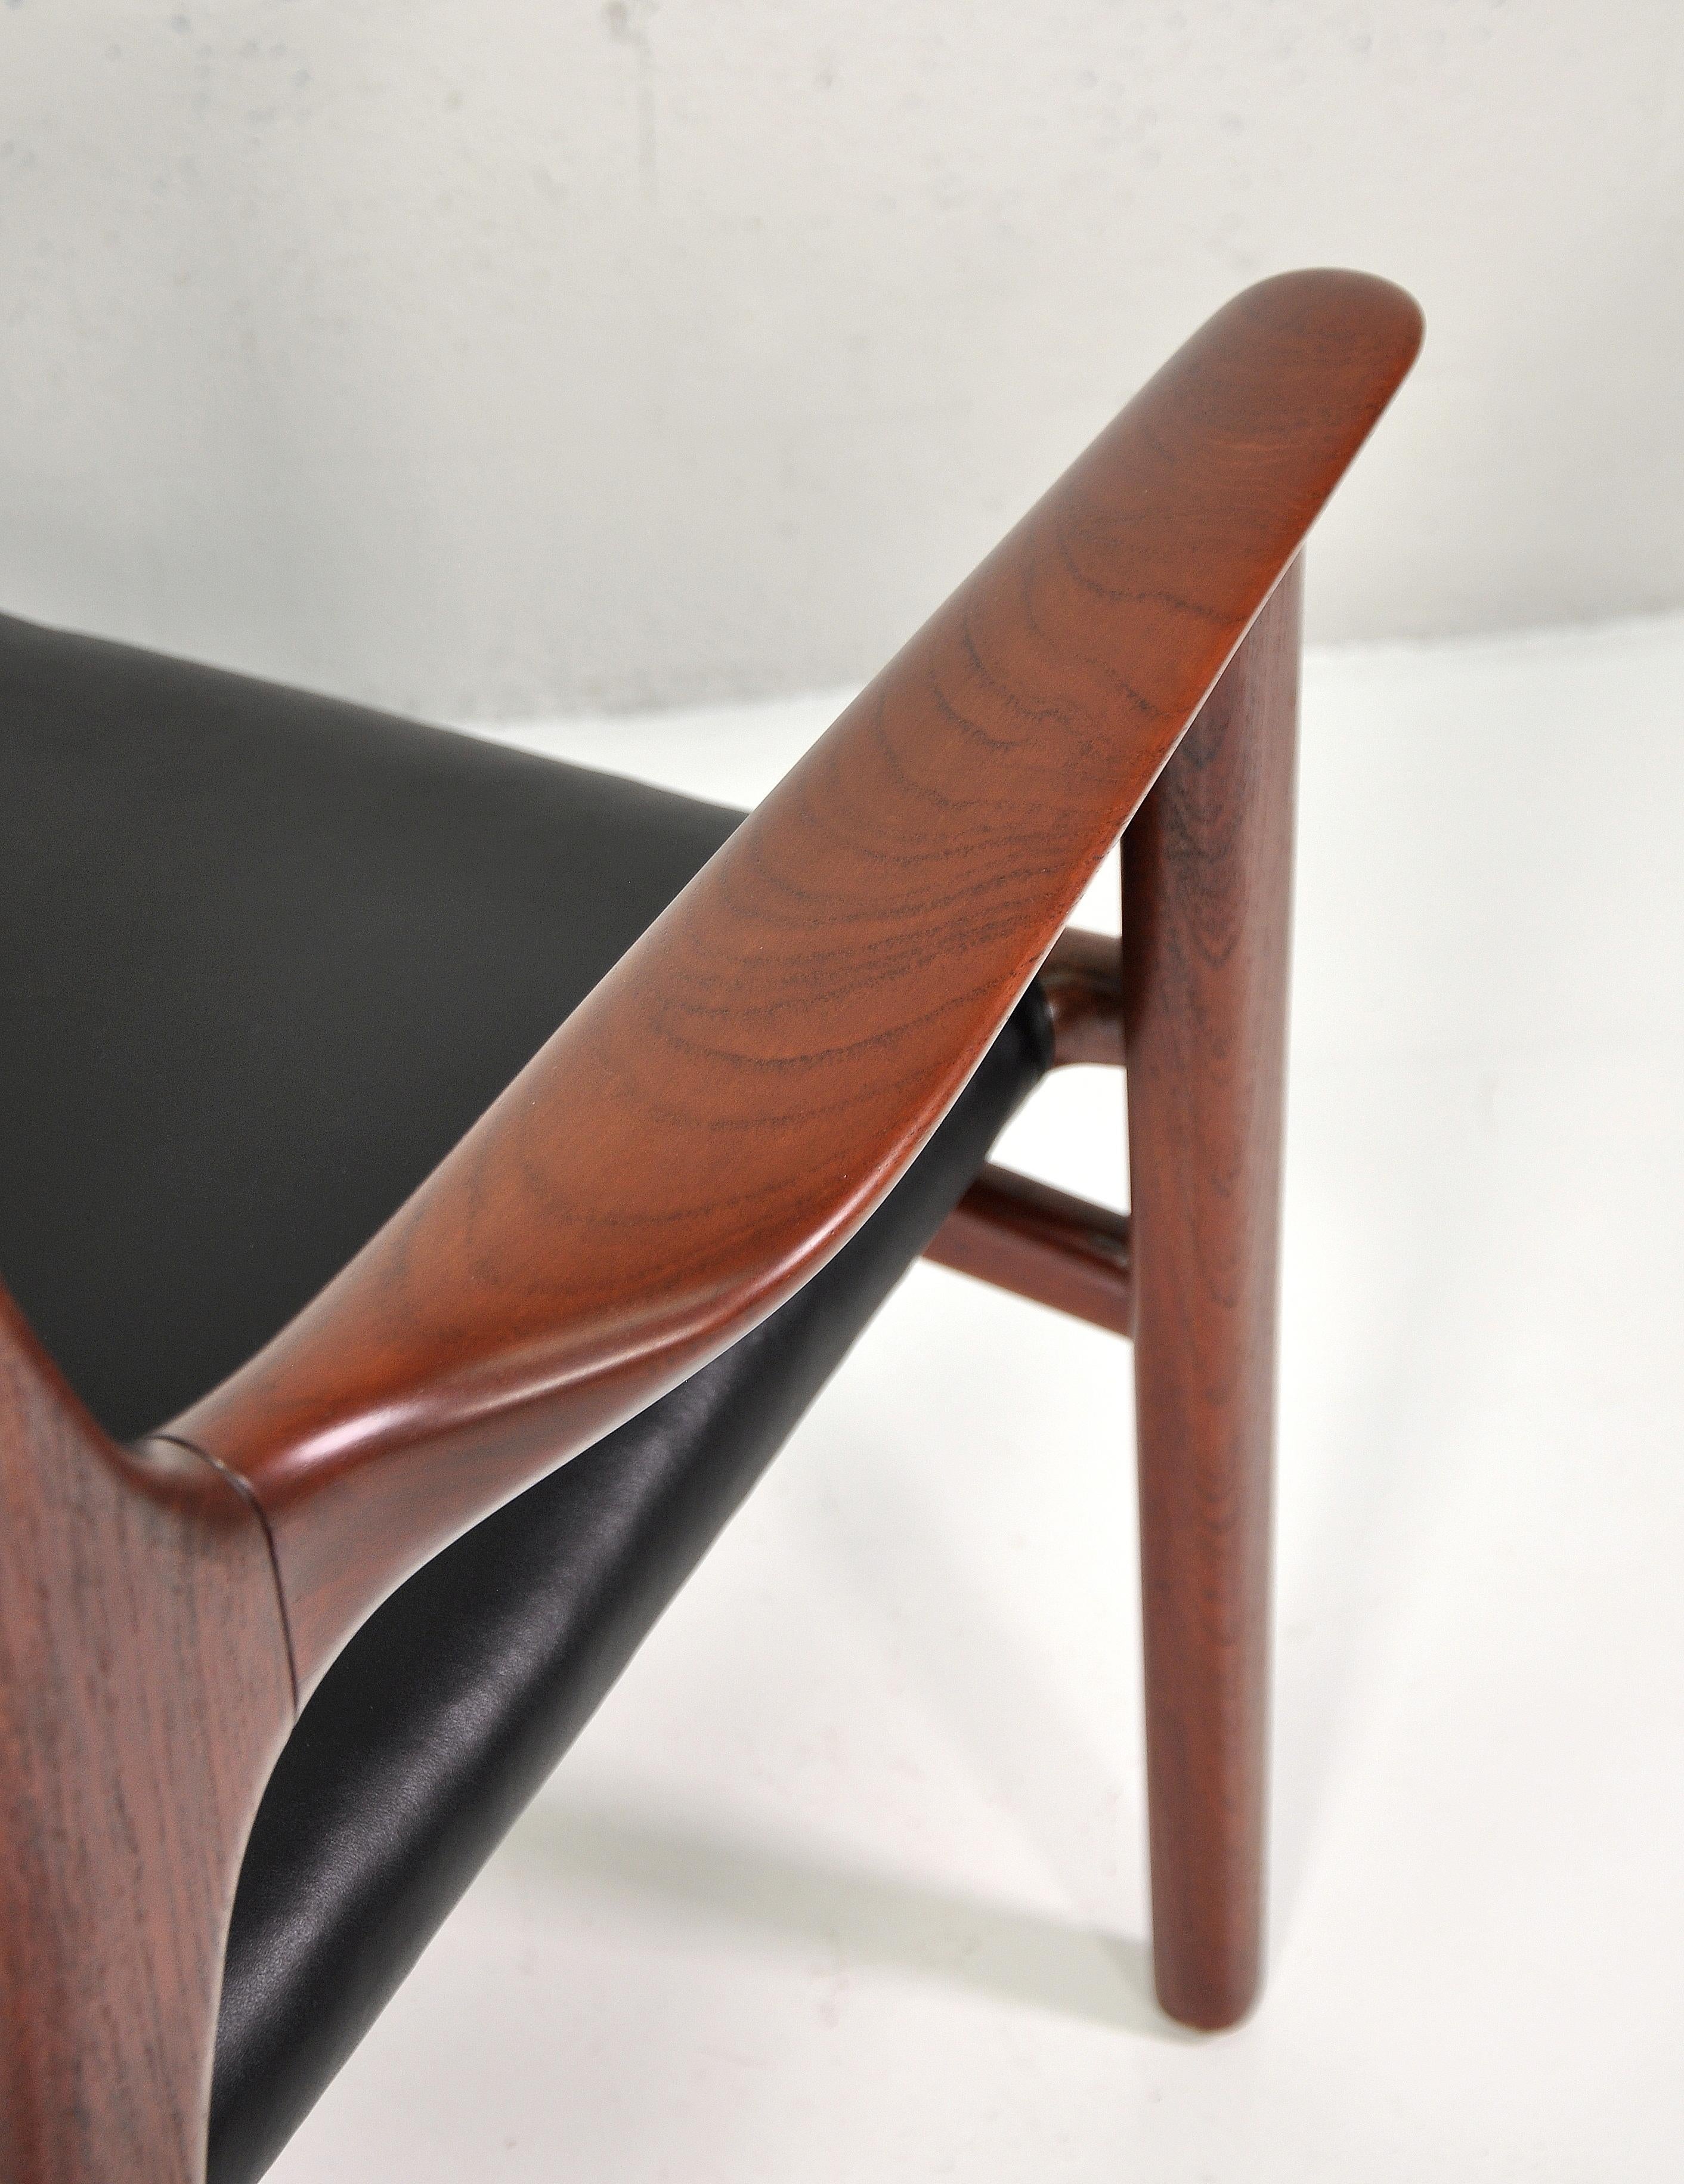 Vintage easy chair designed by Hans Wegner and executed by Johannes Hansen in the 1950s. Rare lounge chair model JH-515. Genuine, soft, black leather in excellent condition. The splendidly sculpted teak open frame features a rich patina that creates